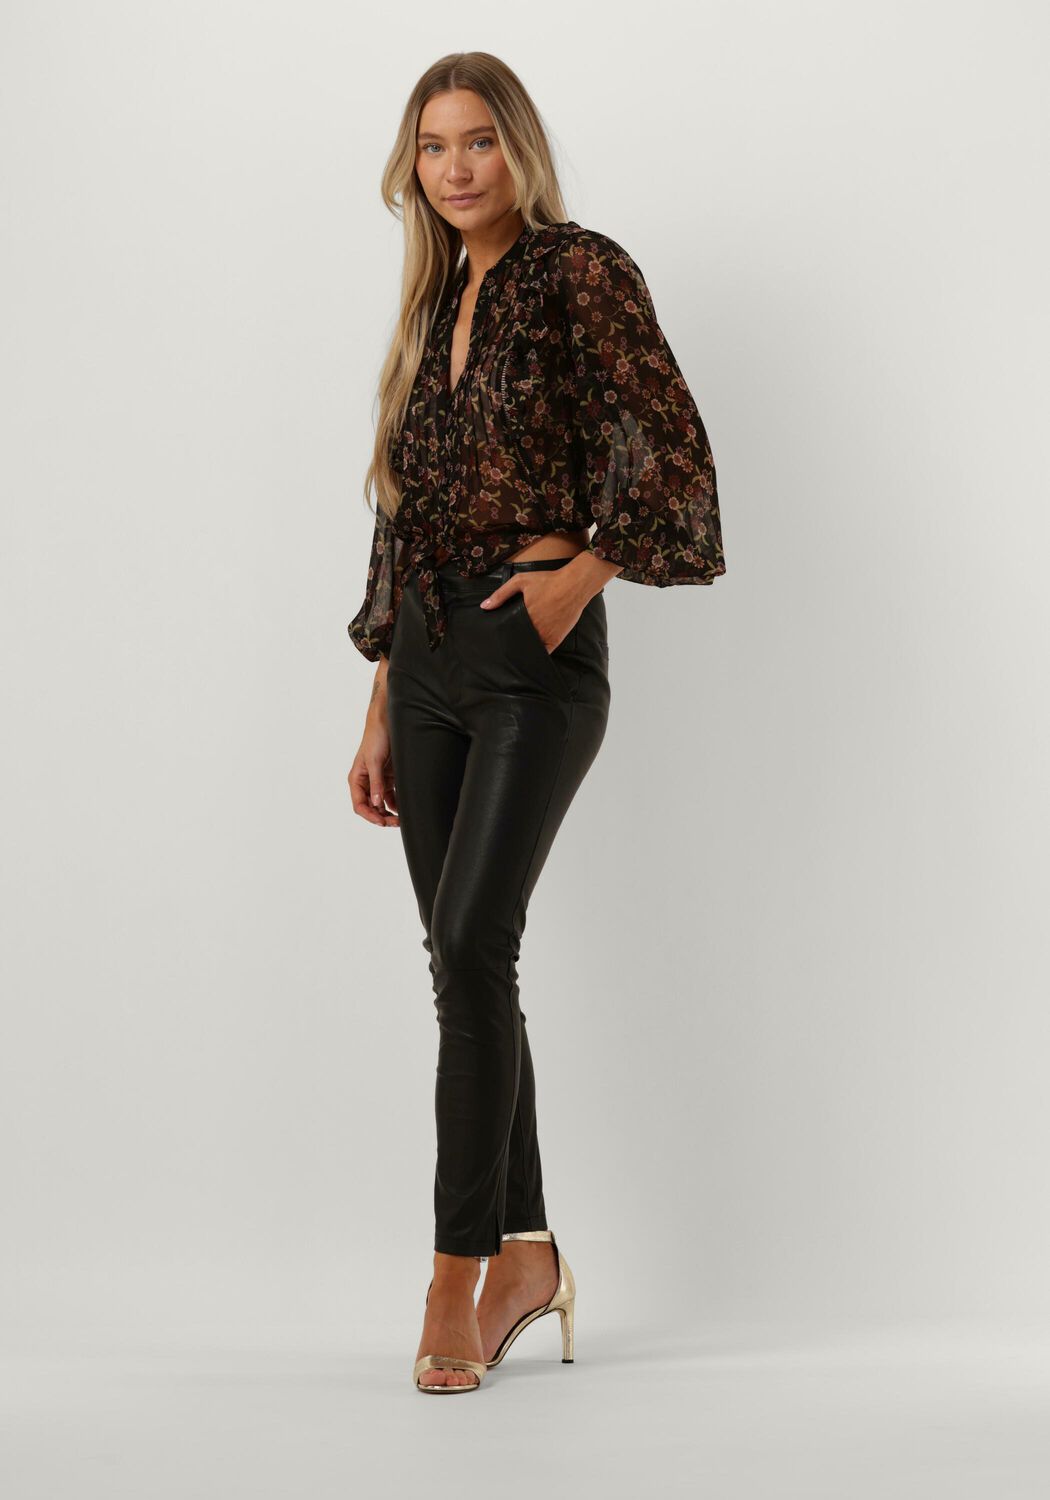 Guess Dionne Tie Front Top - Sixty Three Boutique